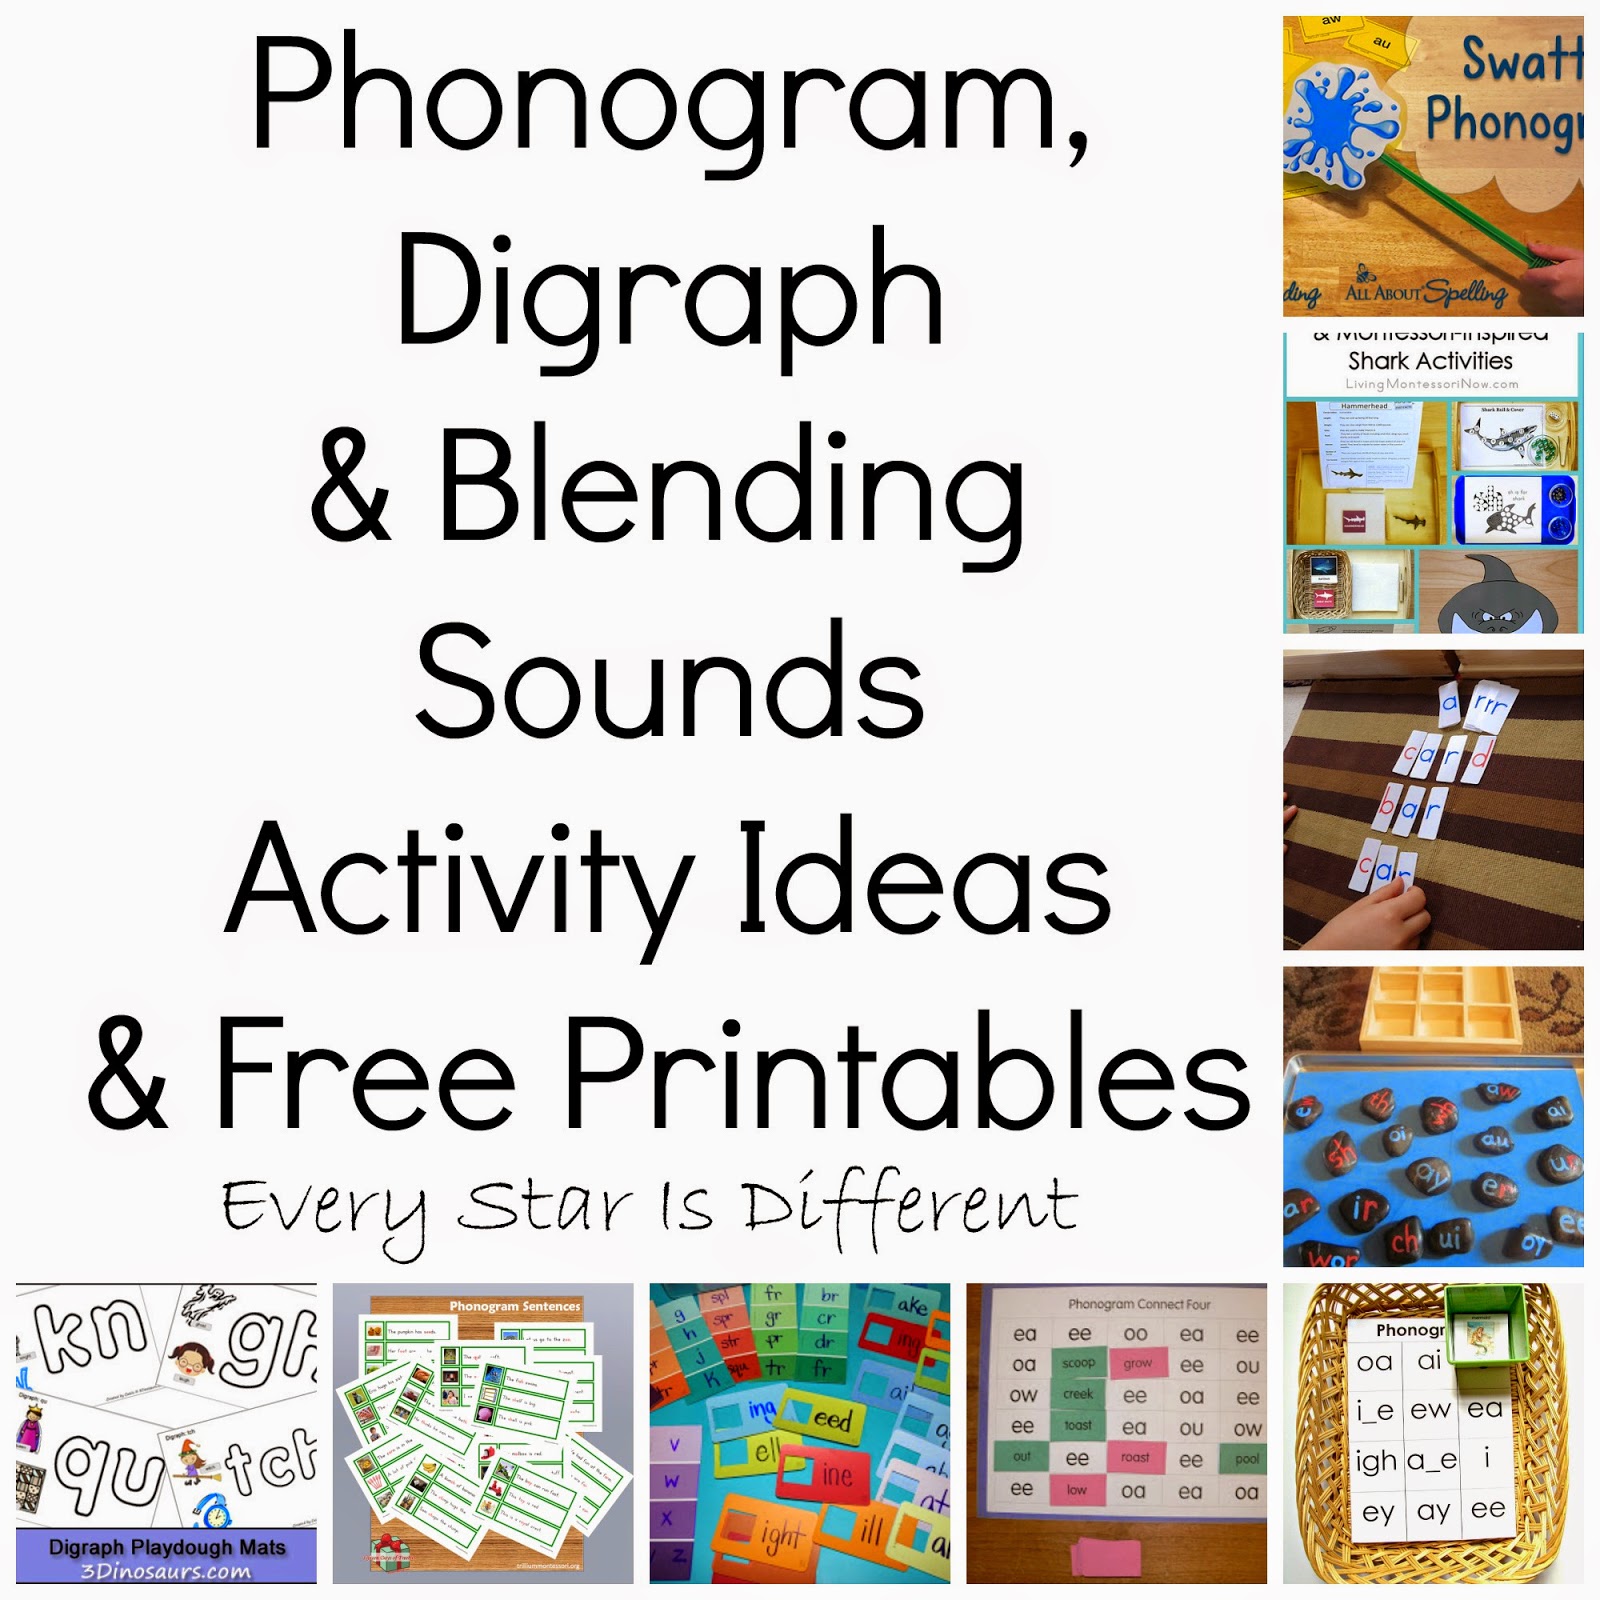 Phonogram, Digraph, and Blending Sounds Activities and Free Printables